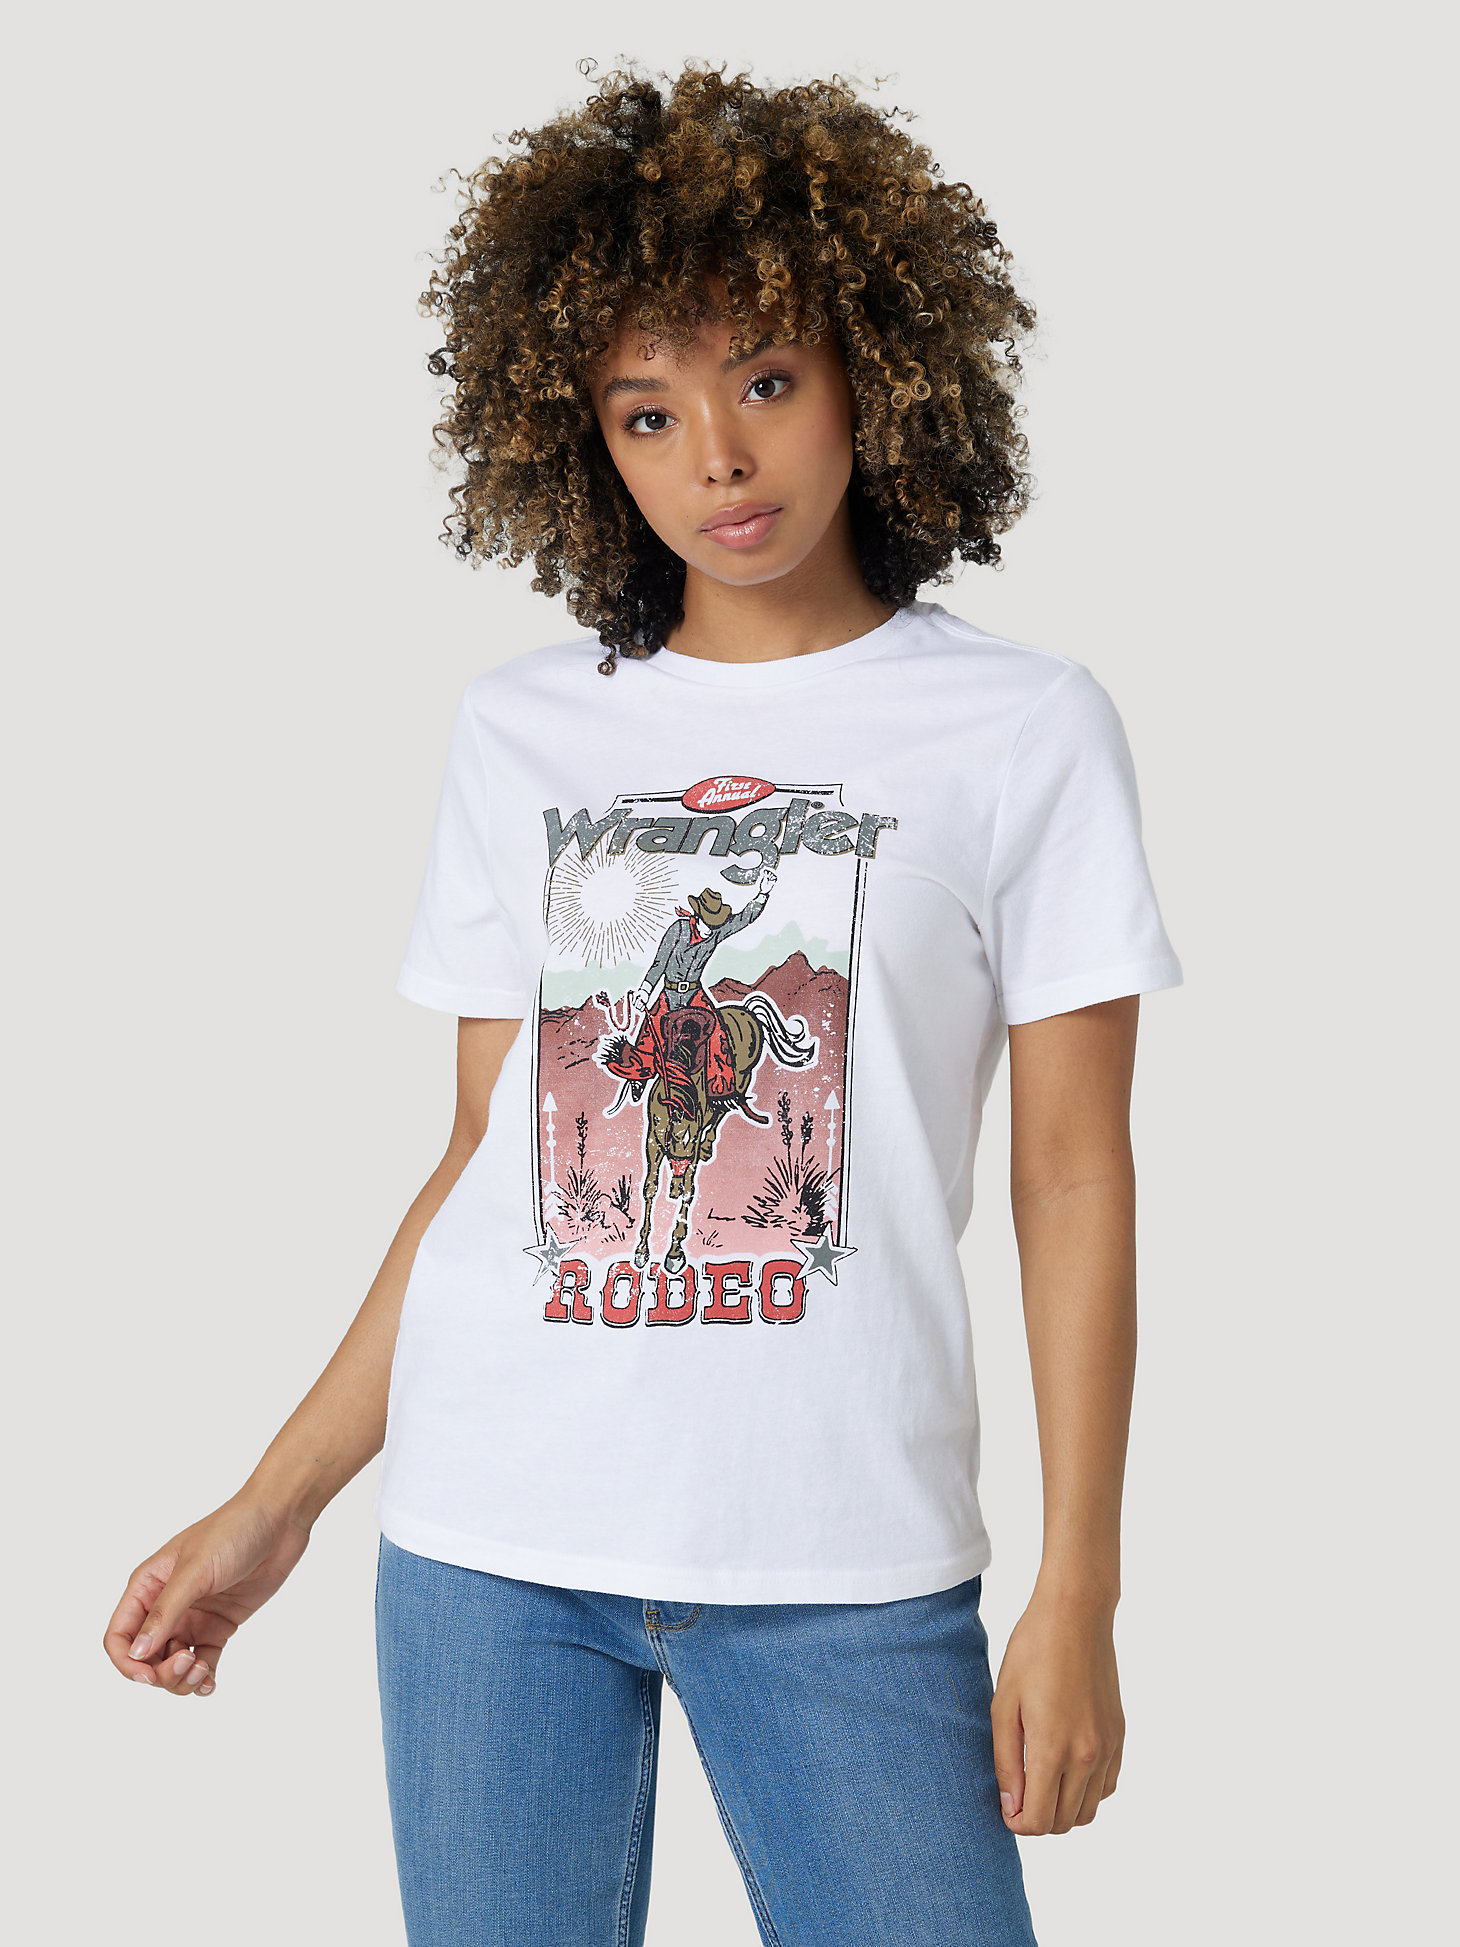 Women's Rodeo Poster Tee in Bright White main view